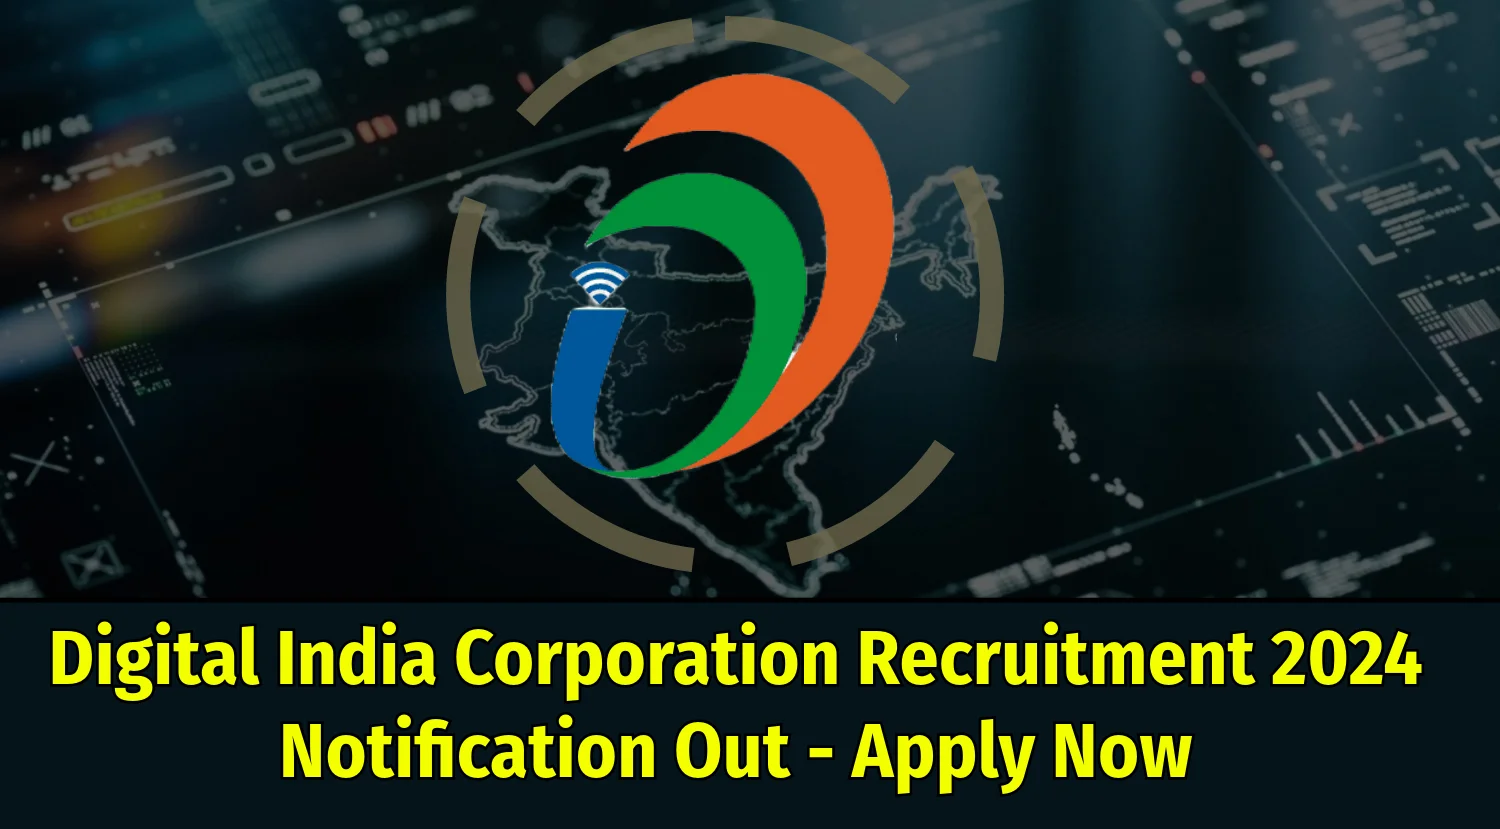 Digital India Corporation Recruitment 2024 Notification Out